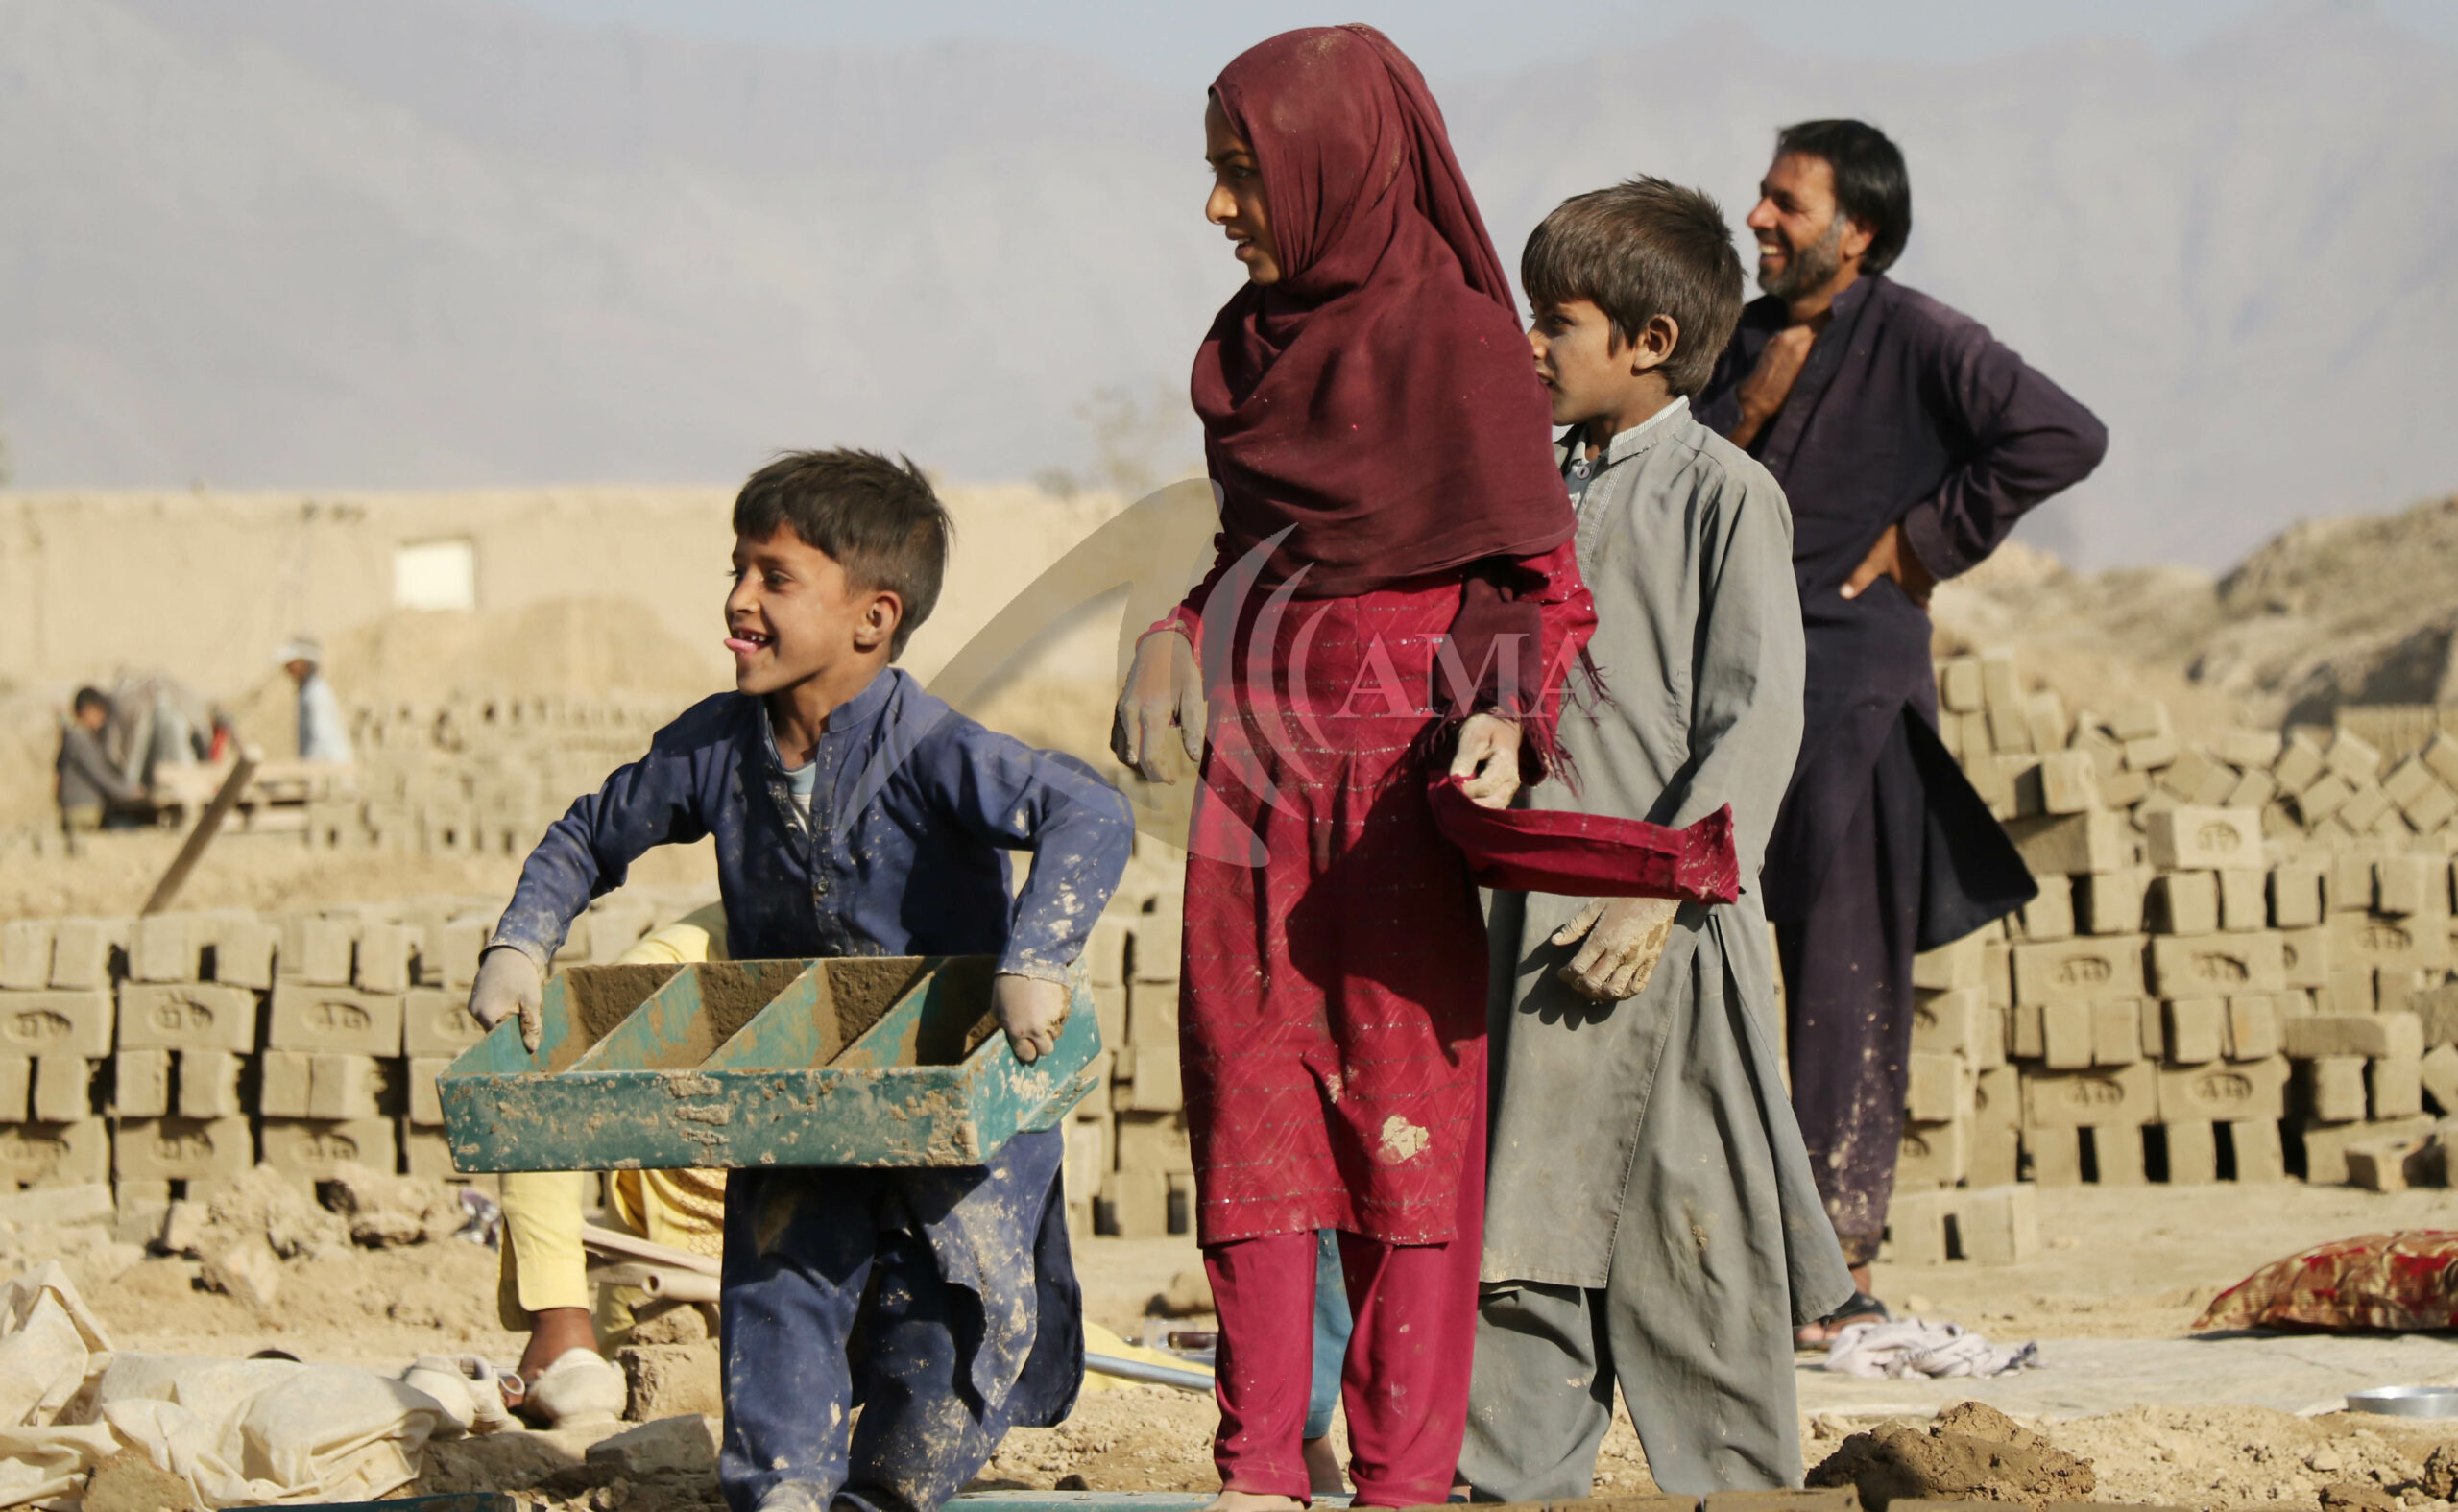 Afghanistan: Financial crisis forces children to work in brick factories